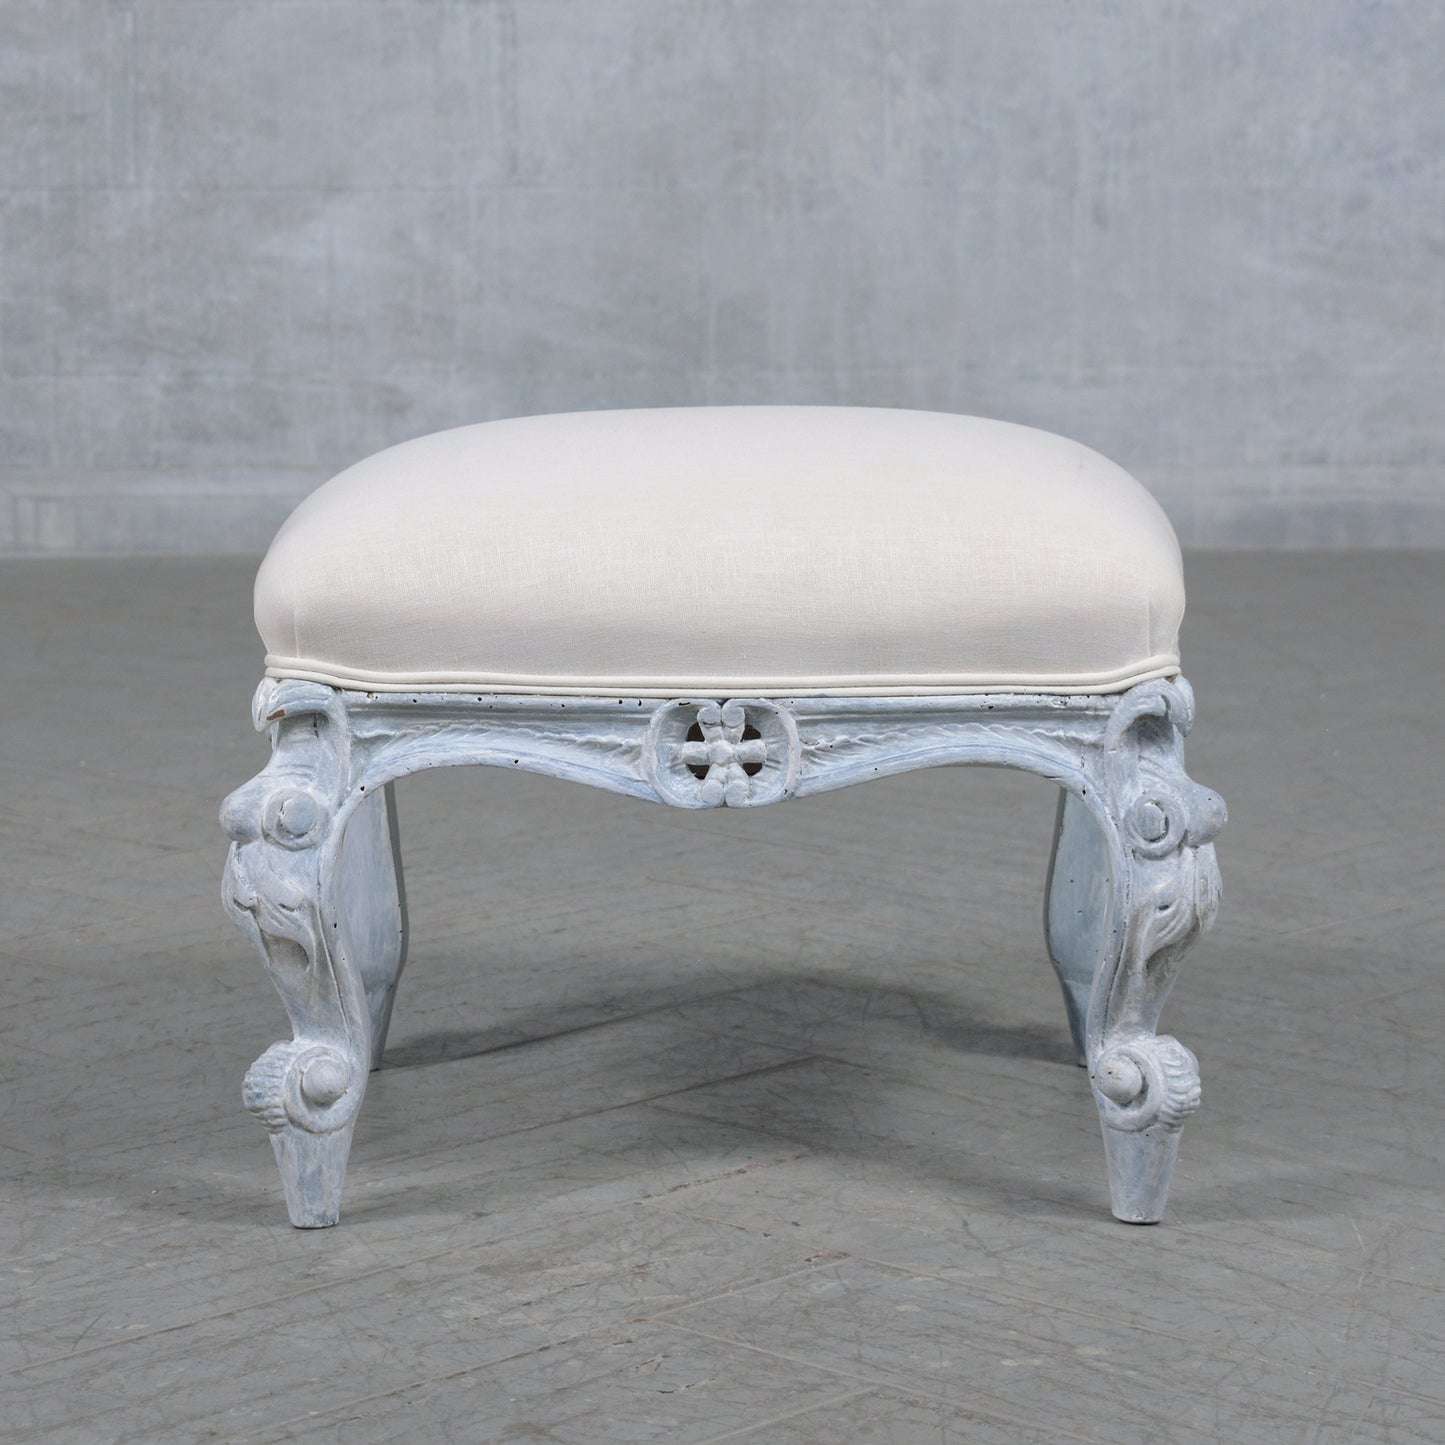 Antique Louis XV Style Footstool in Baby Blue & White with Linen Upholstery